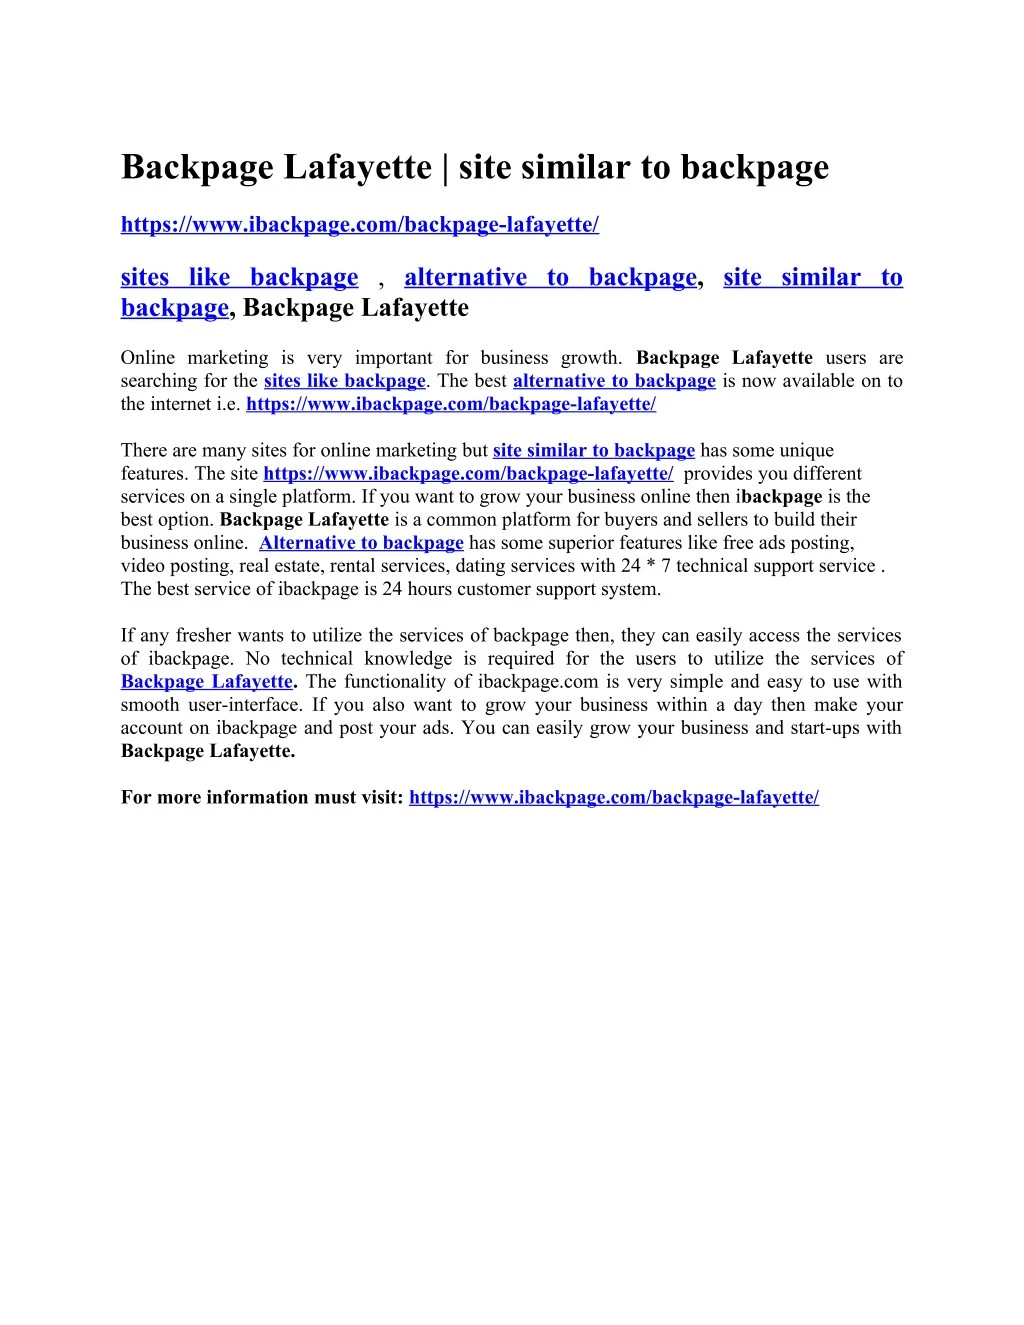 backpage lafayette site similar to backpage n.